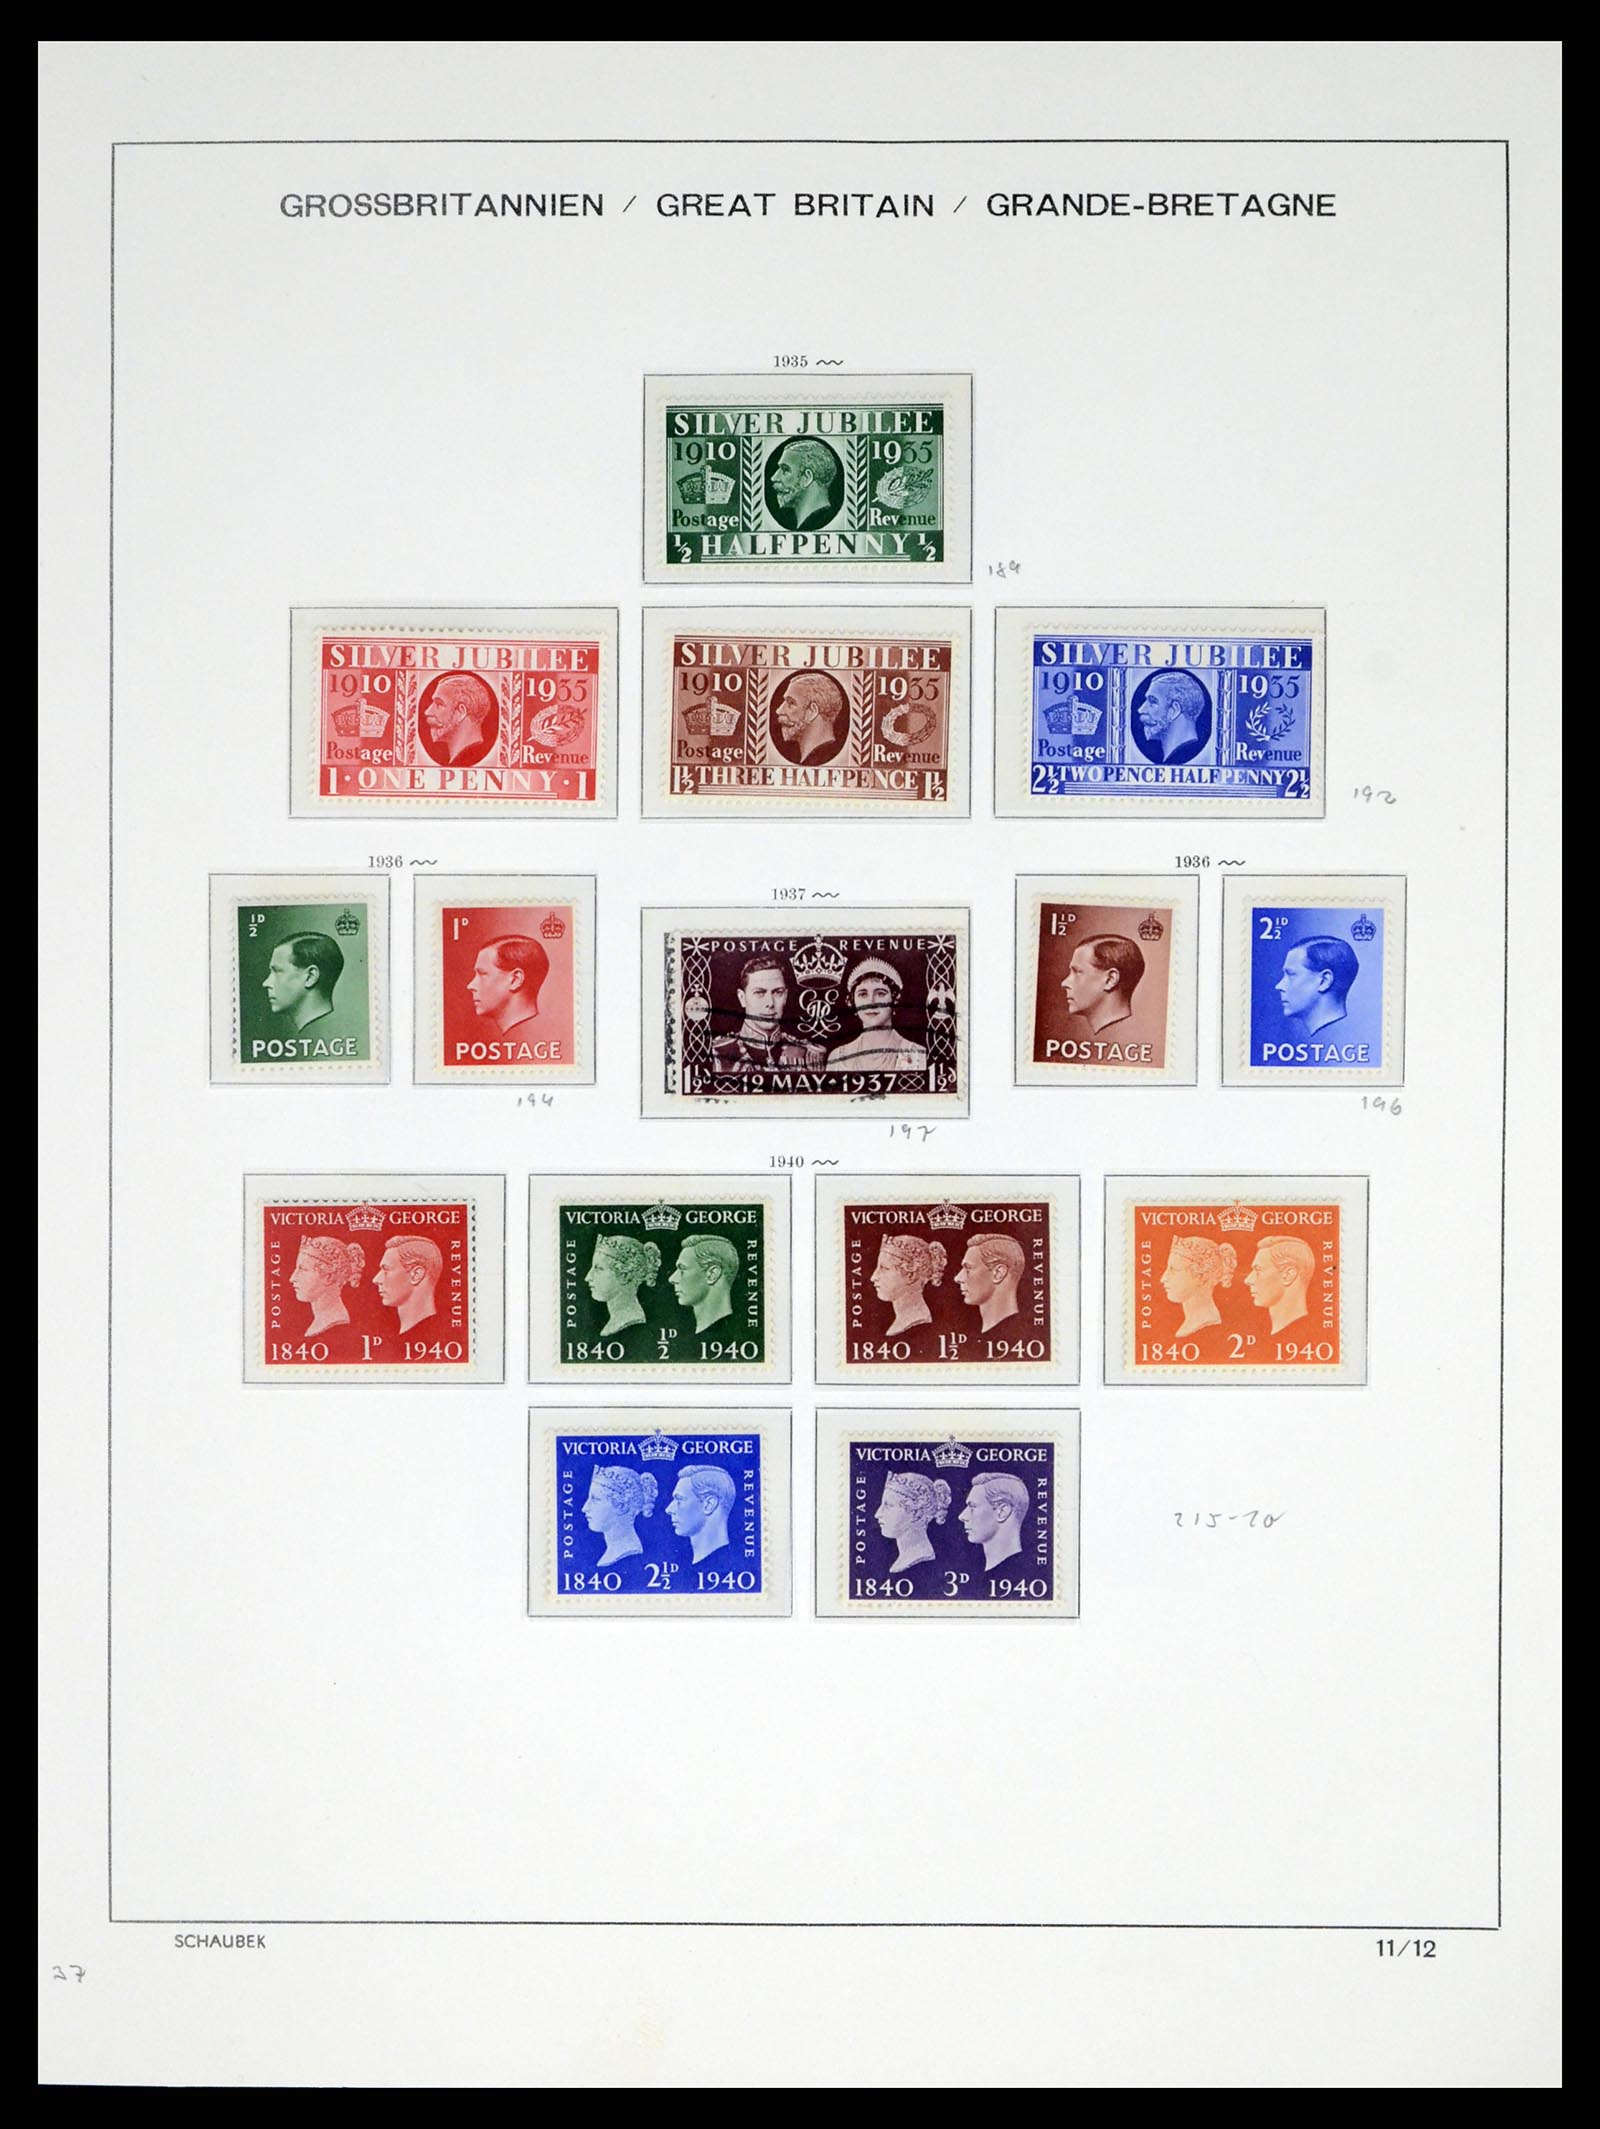 37310 015 - Stamp collection 37310 Great Britain 1840-1988.